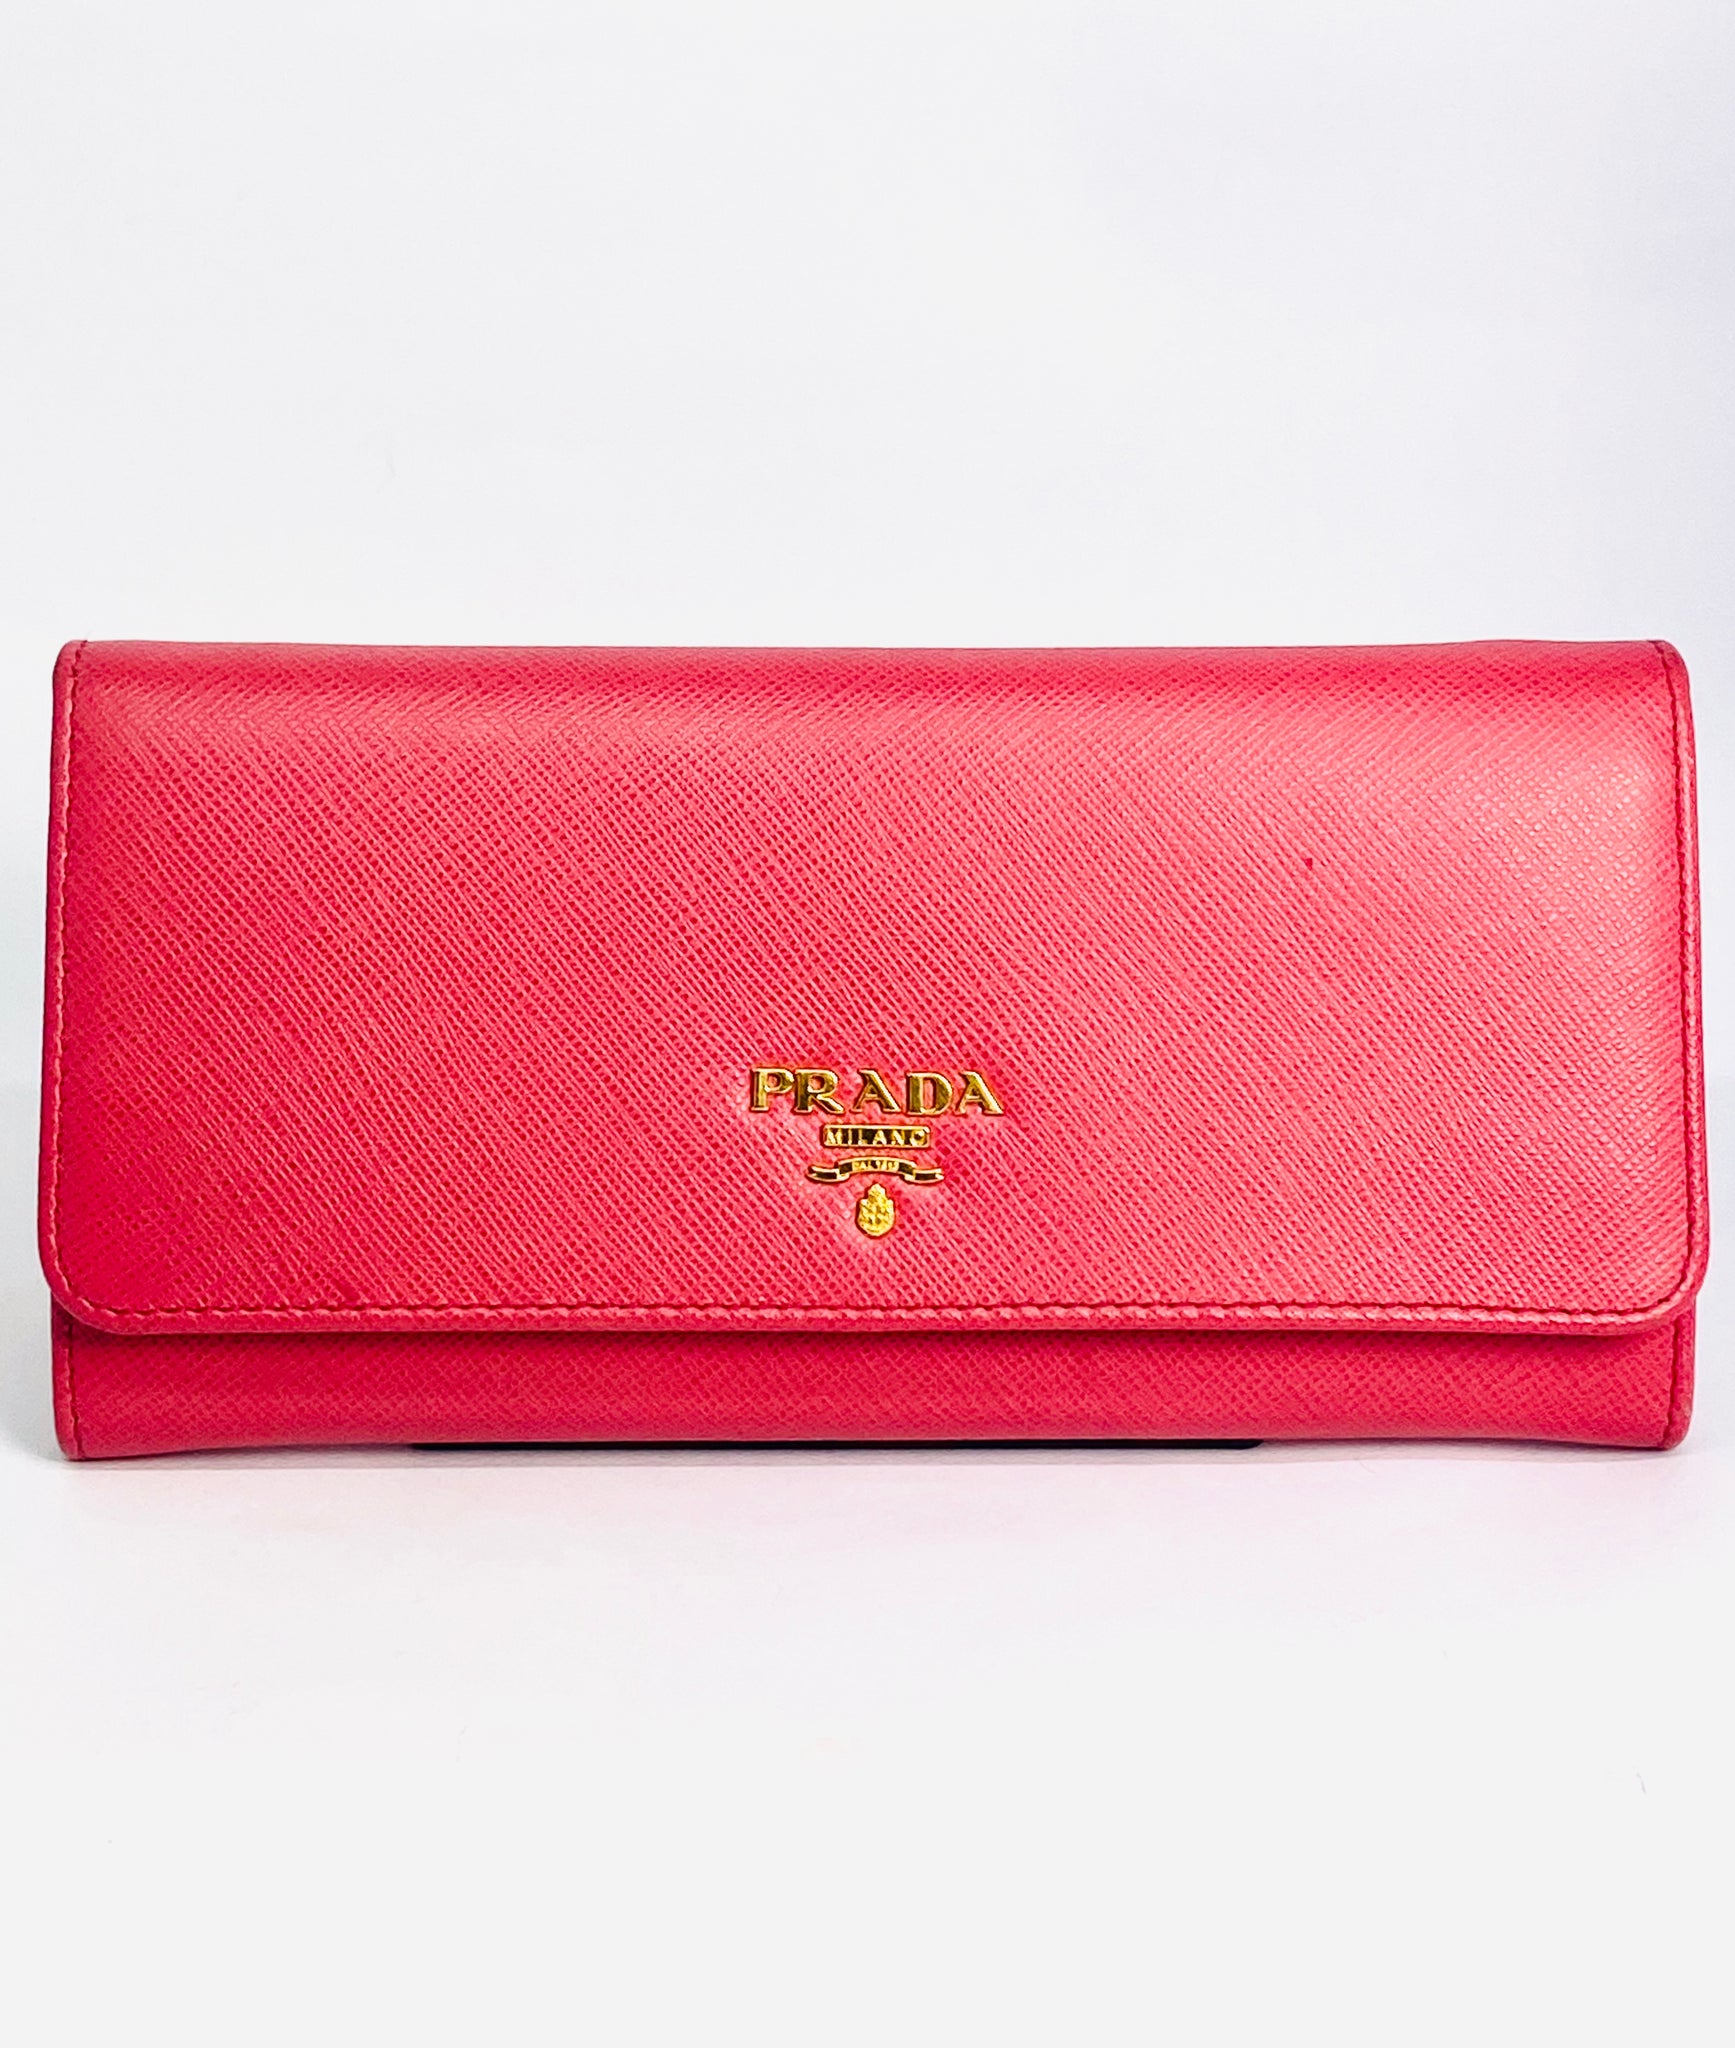 Prada Pink Saffiano Leather Bow Flap Wallet